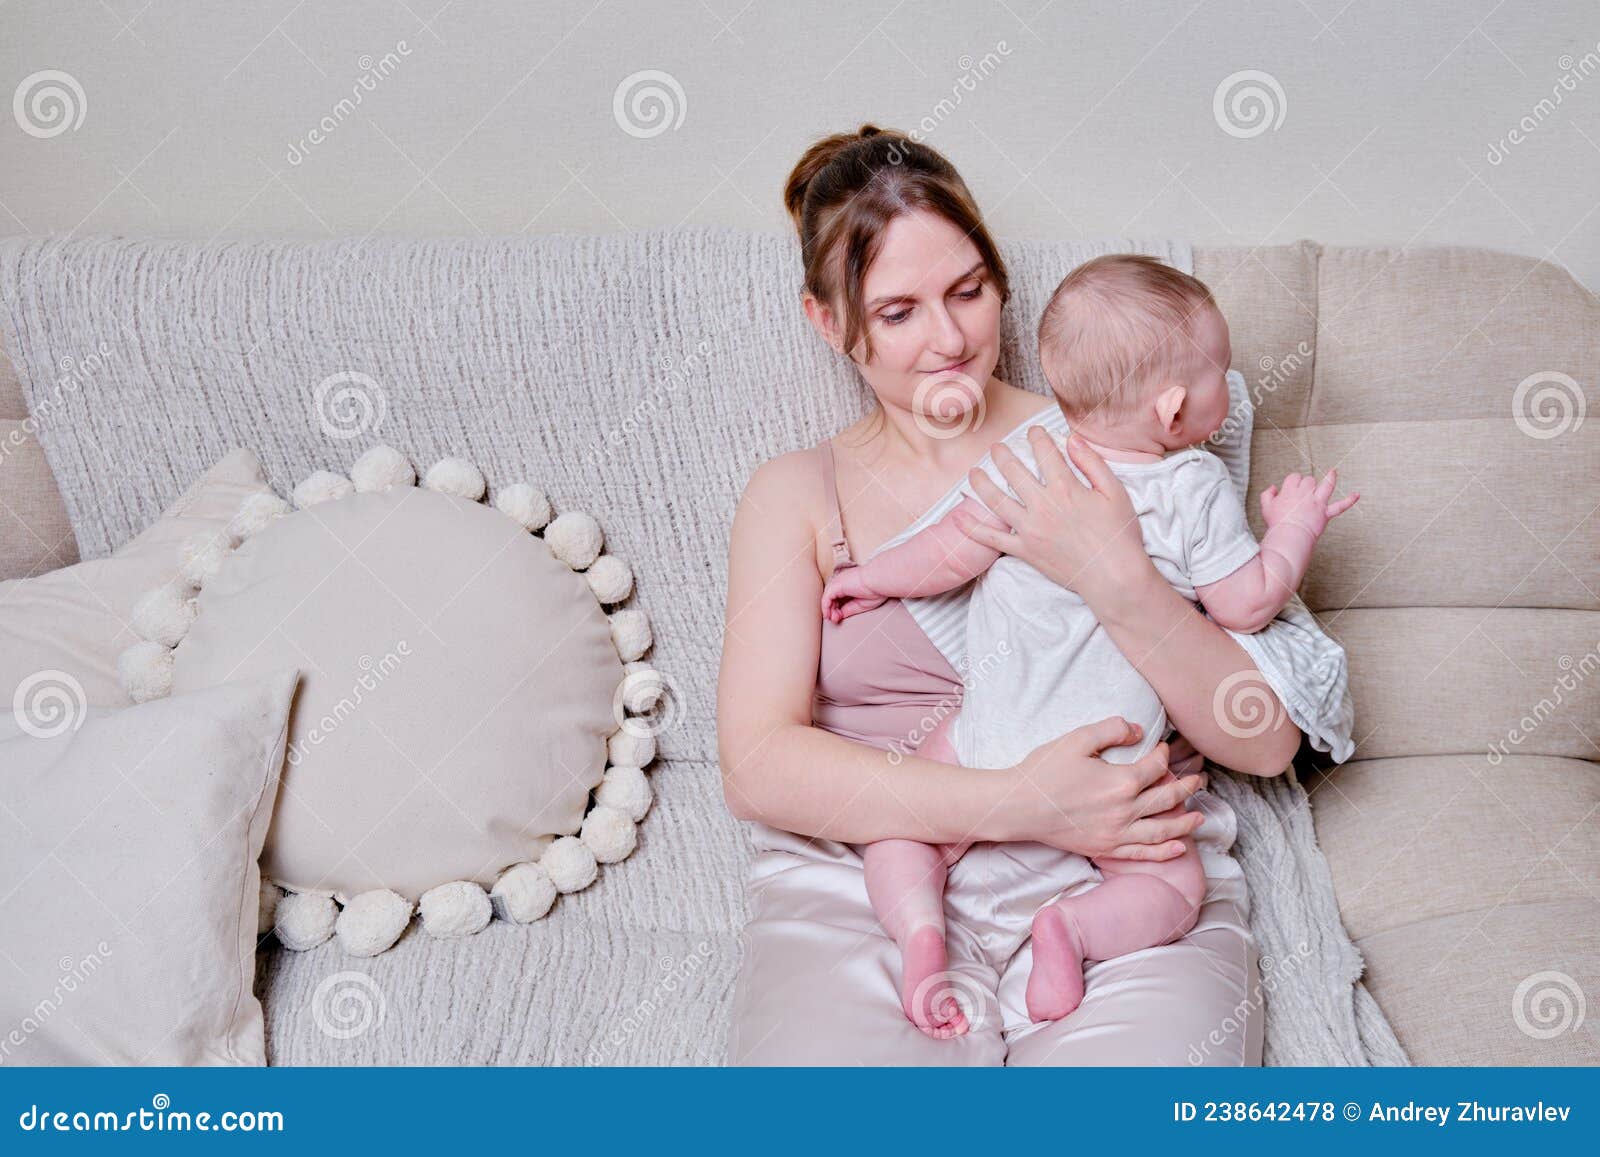 a mother woman holds an infant baby to regurgitate excess air after breastfeeding. mom with a child boy holds vertically after